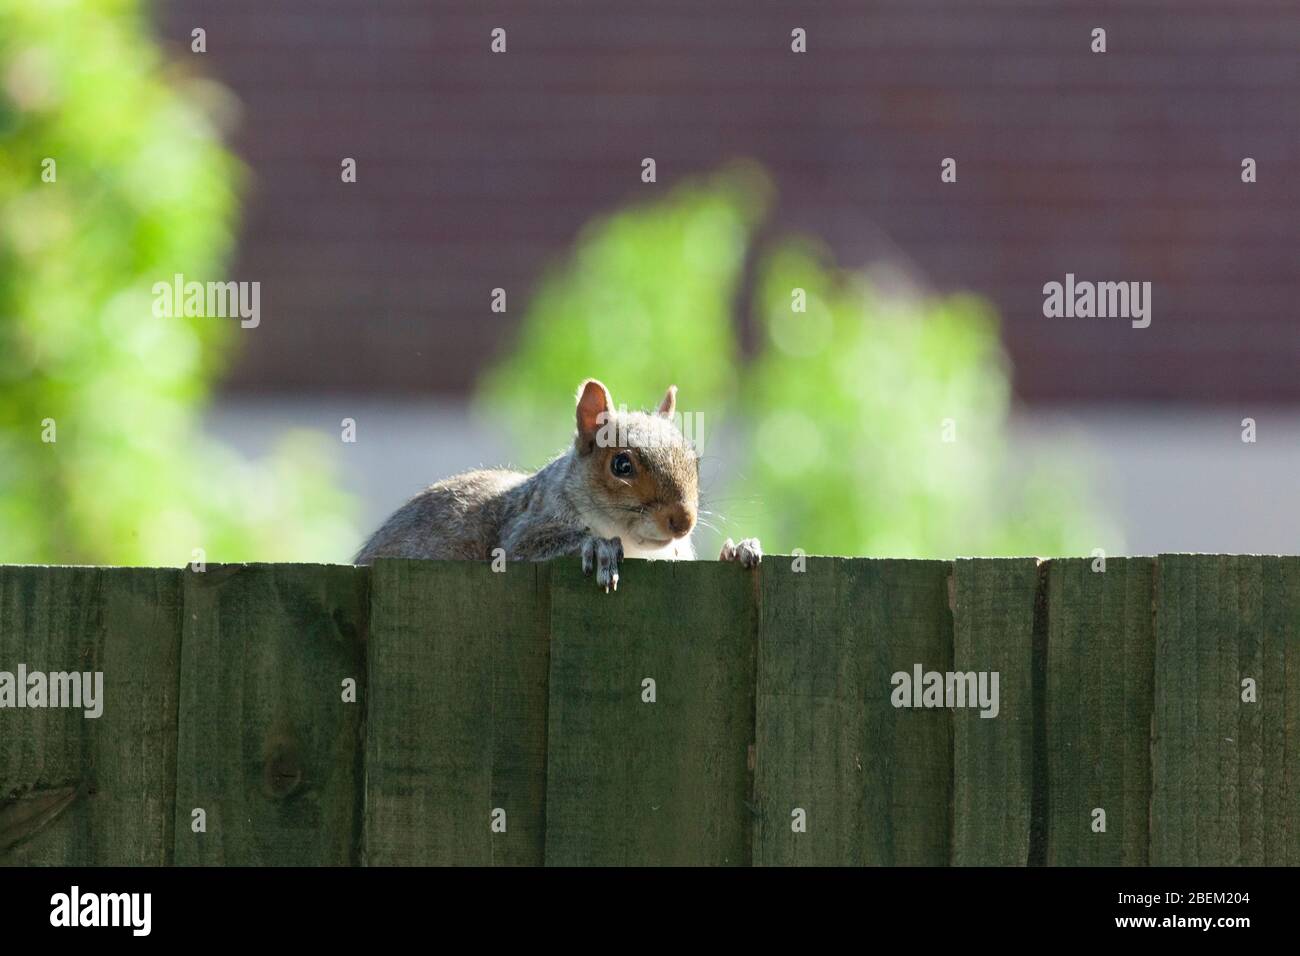 London, UK. 14th Apr 2020. UK weather, 14 April 2020: a grey squirrel in the Lnodon suburb of Clapham plays peek-a-boo with the photographer from behind a fence. Anna Watson/Alamy Live News Stock Photo